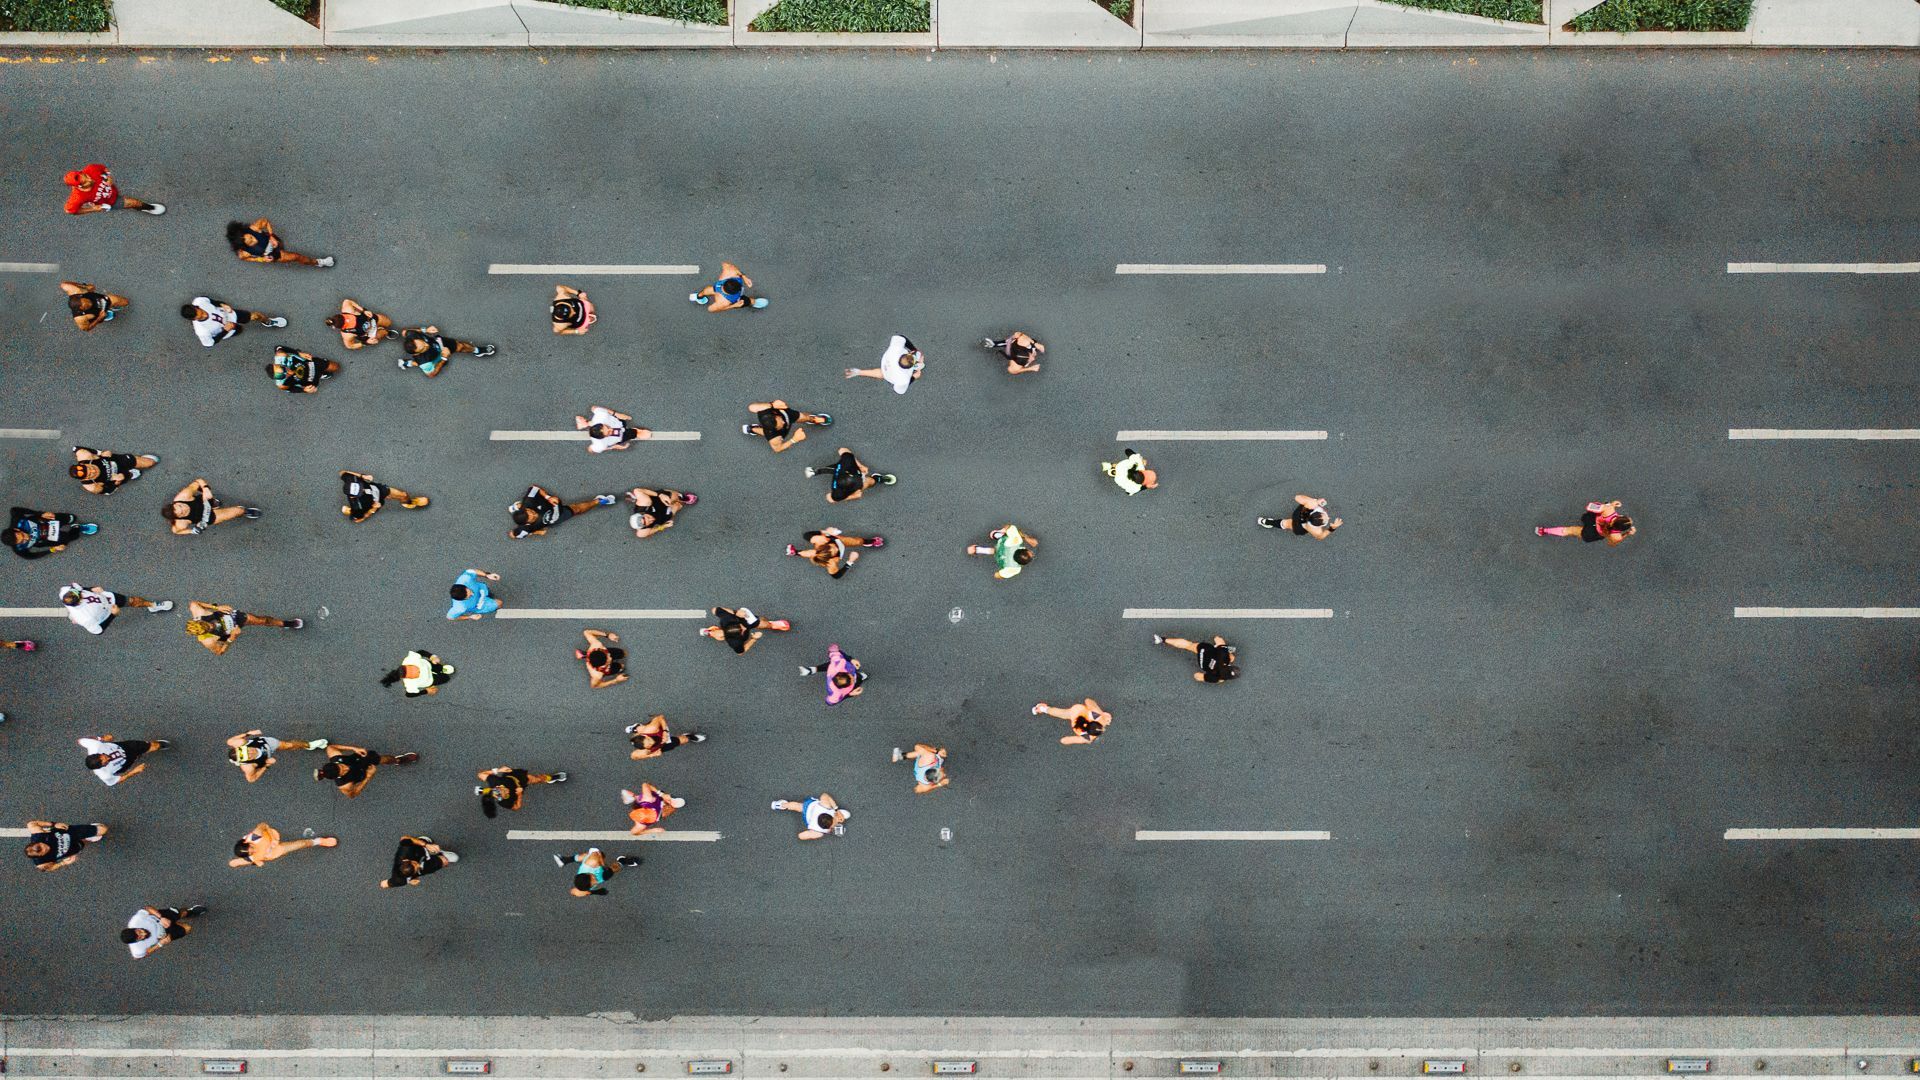 Image of runners in a road race.